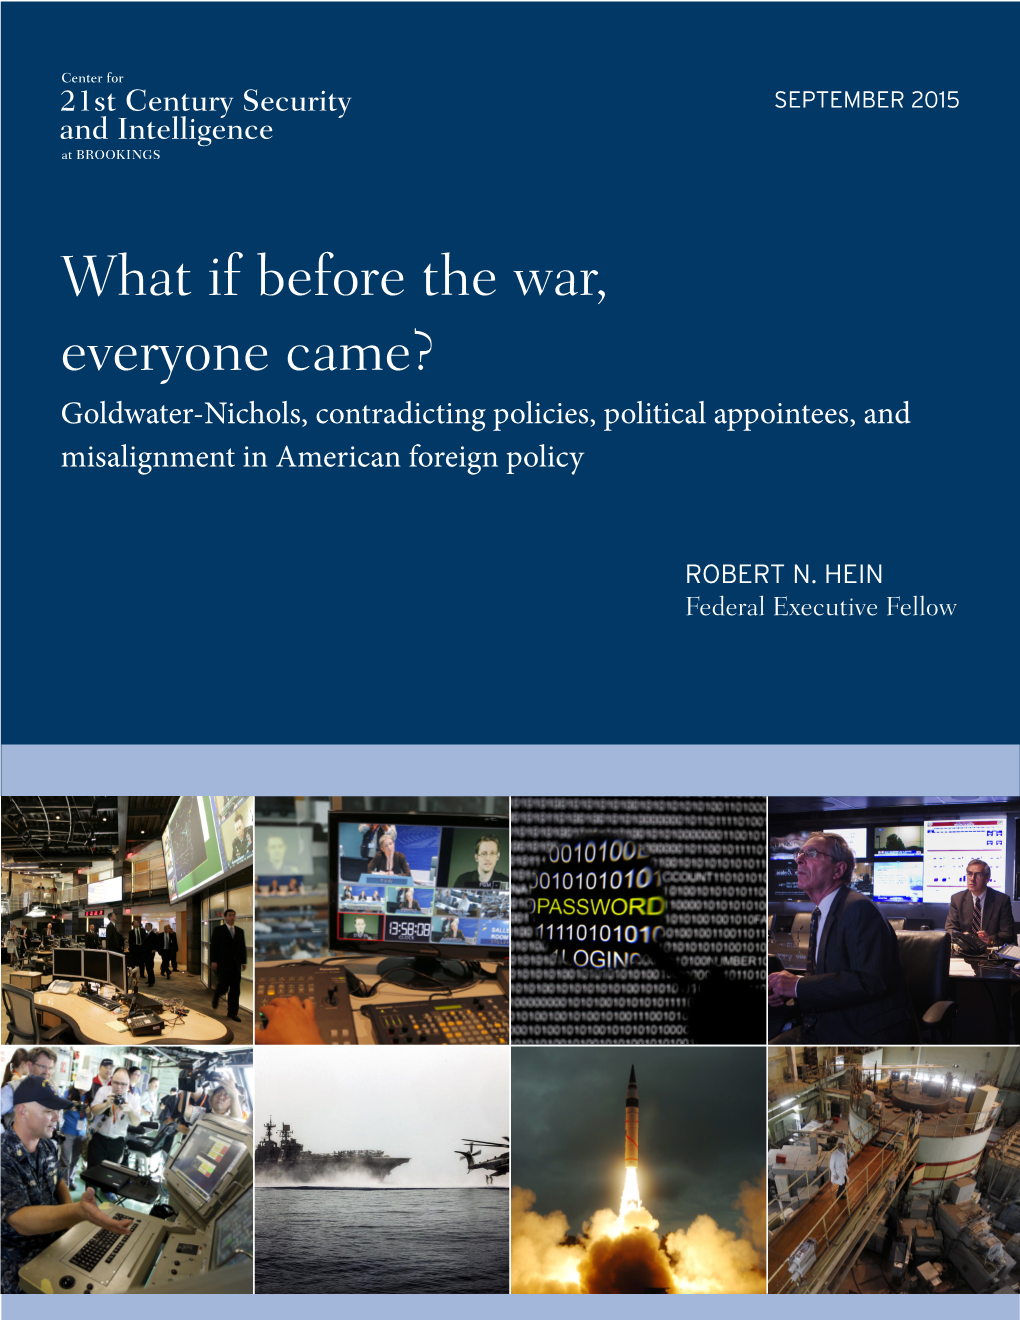 What If Before the War, Everyone Came? Goldwater-Nichols, Contradicting Policies, Political Appointees, and Misalignment in American Foreign Policy